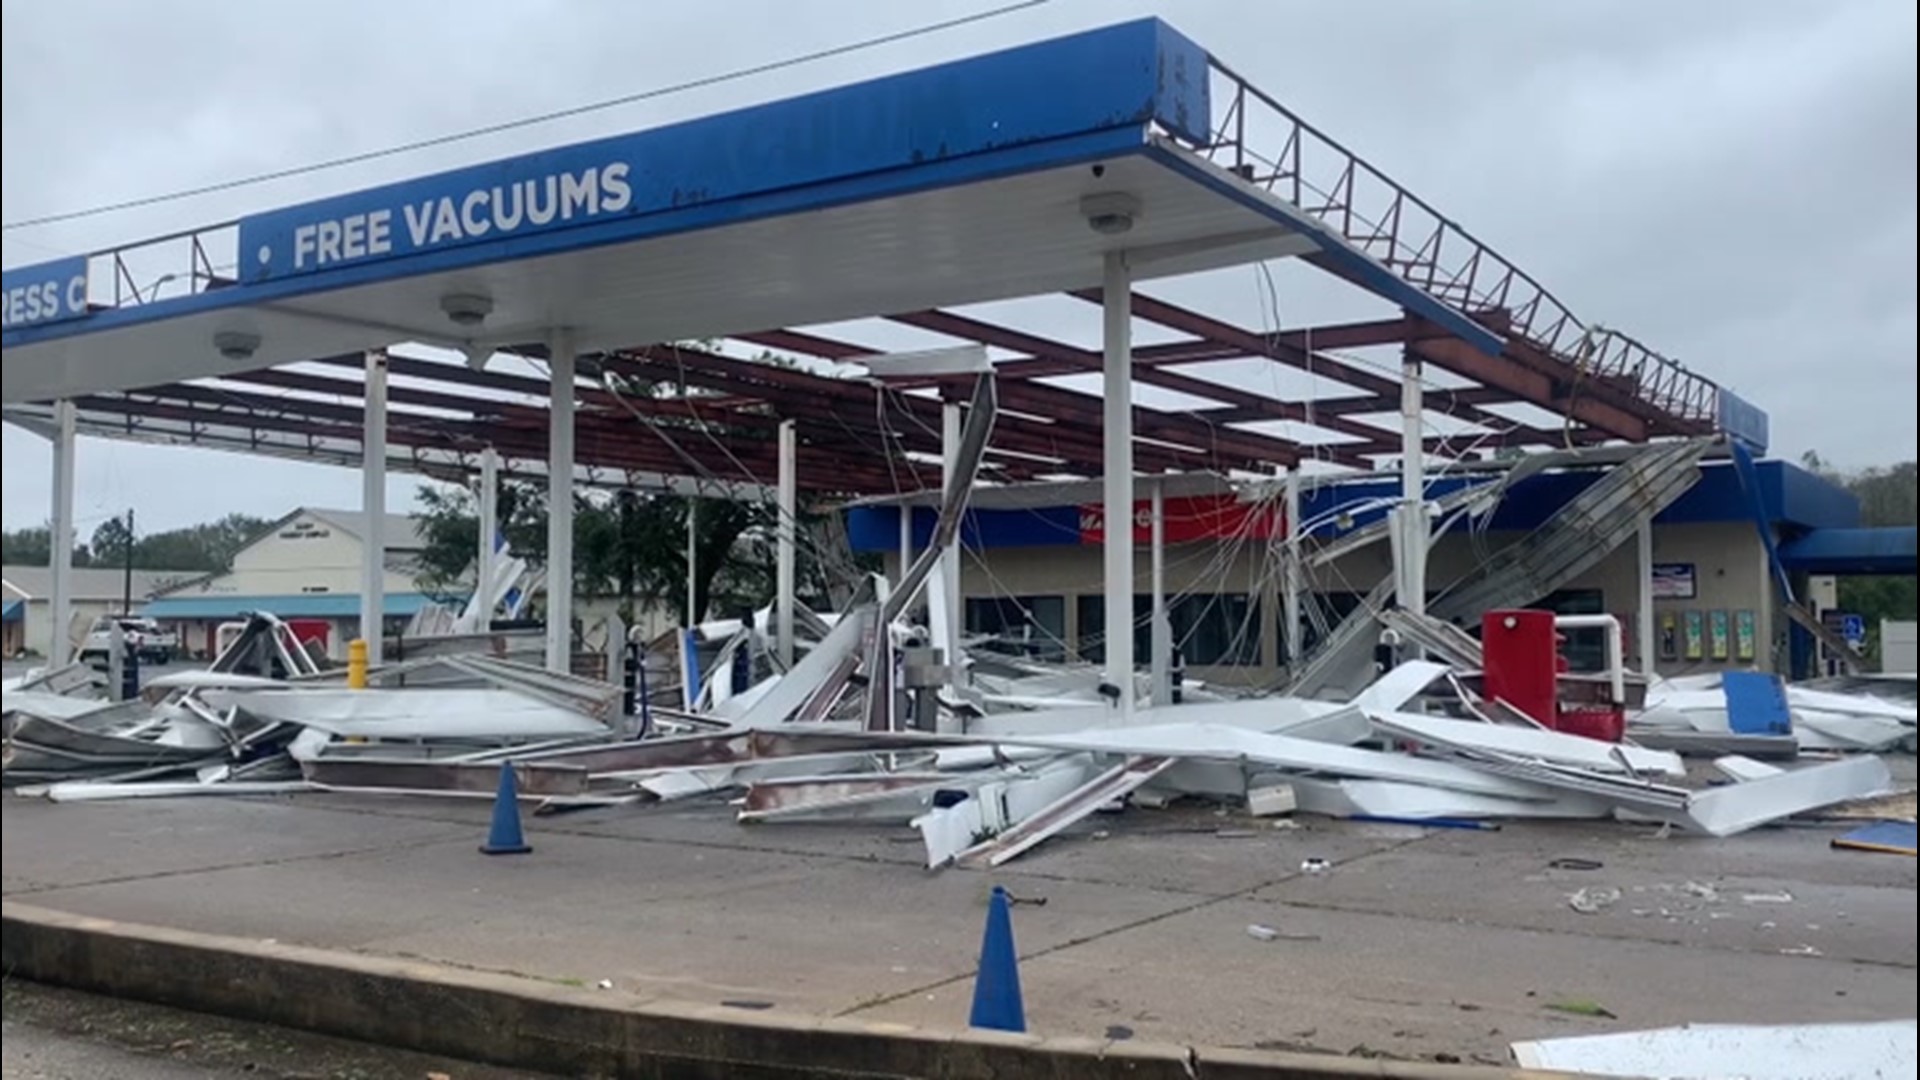 Some people who work and live near the Gulf of Mexico say the 2020 hurricane season has been unforgiving and exhausting.